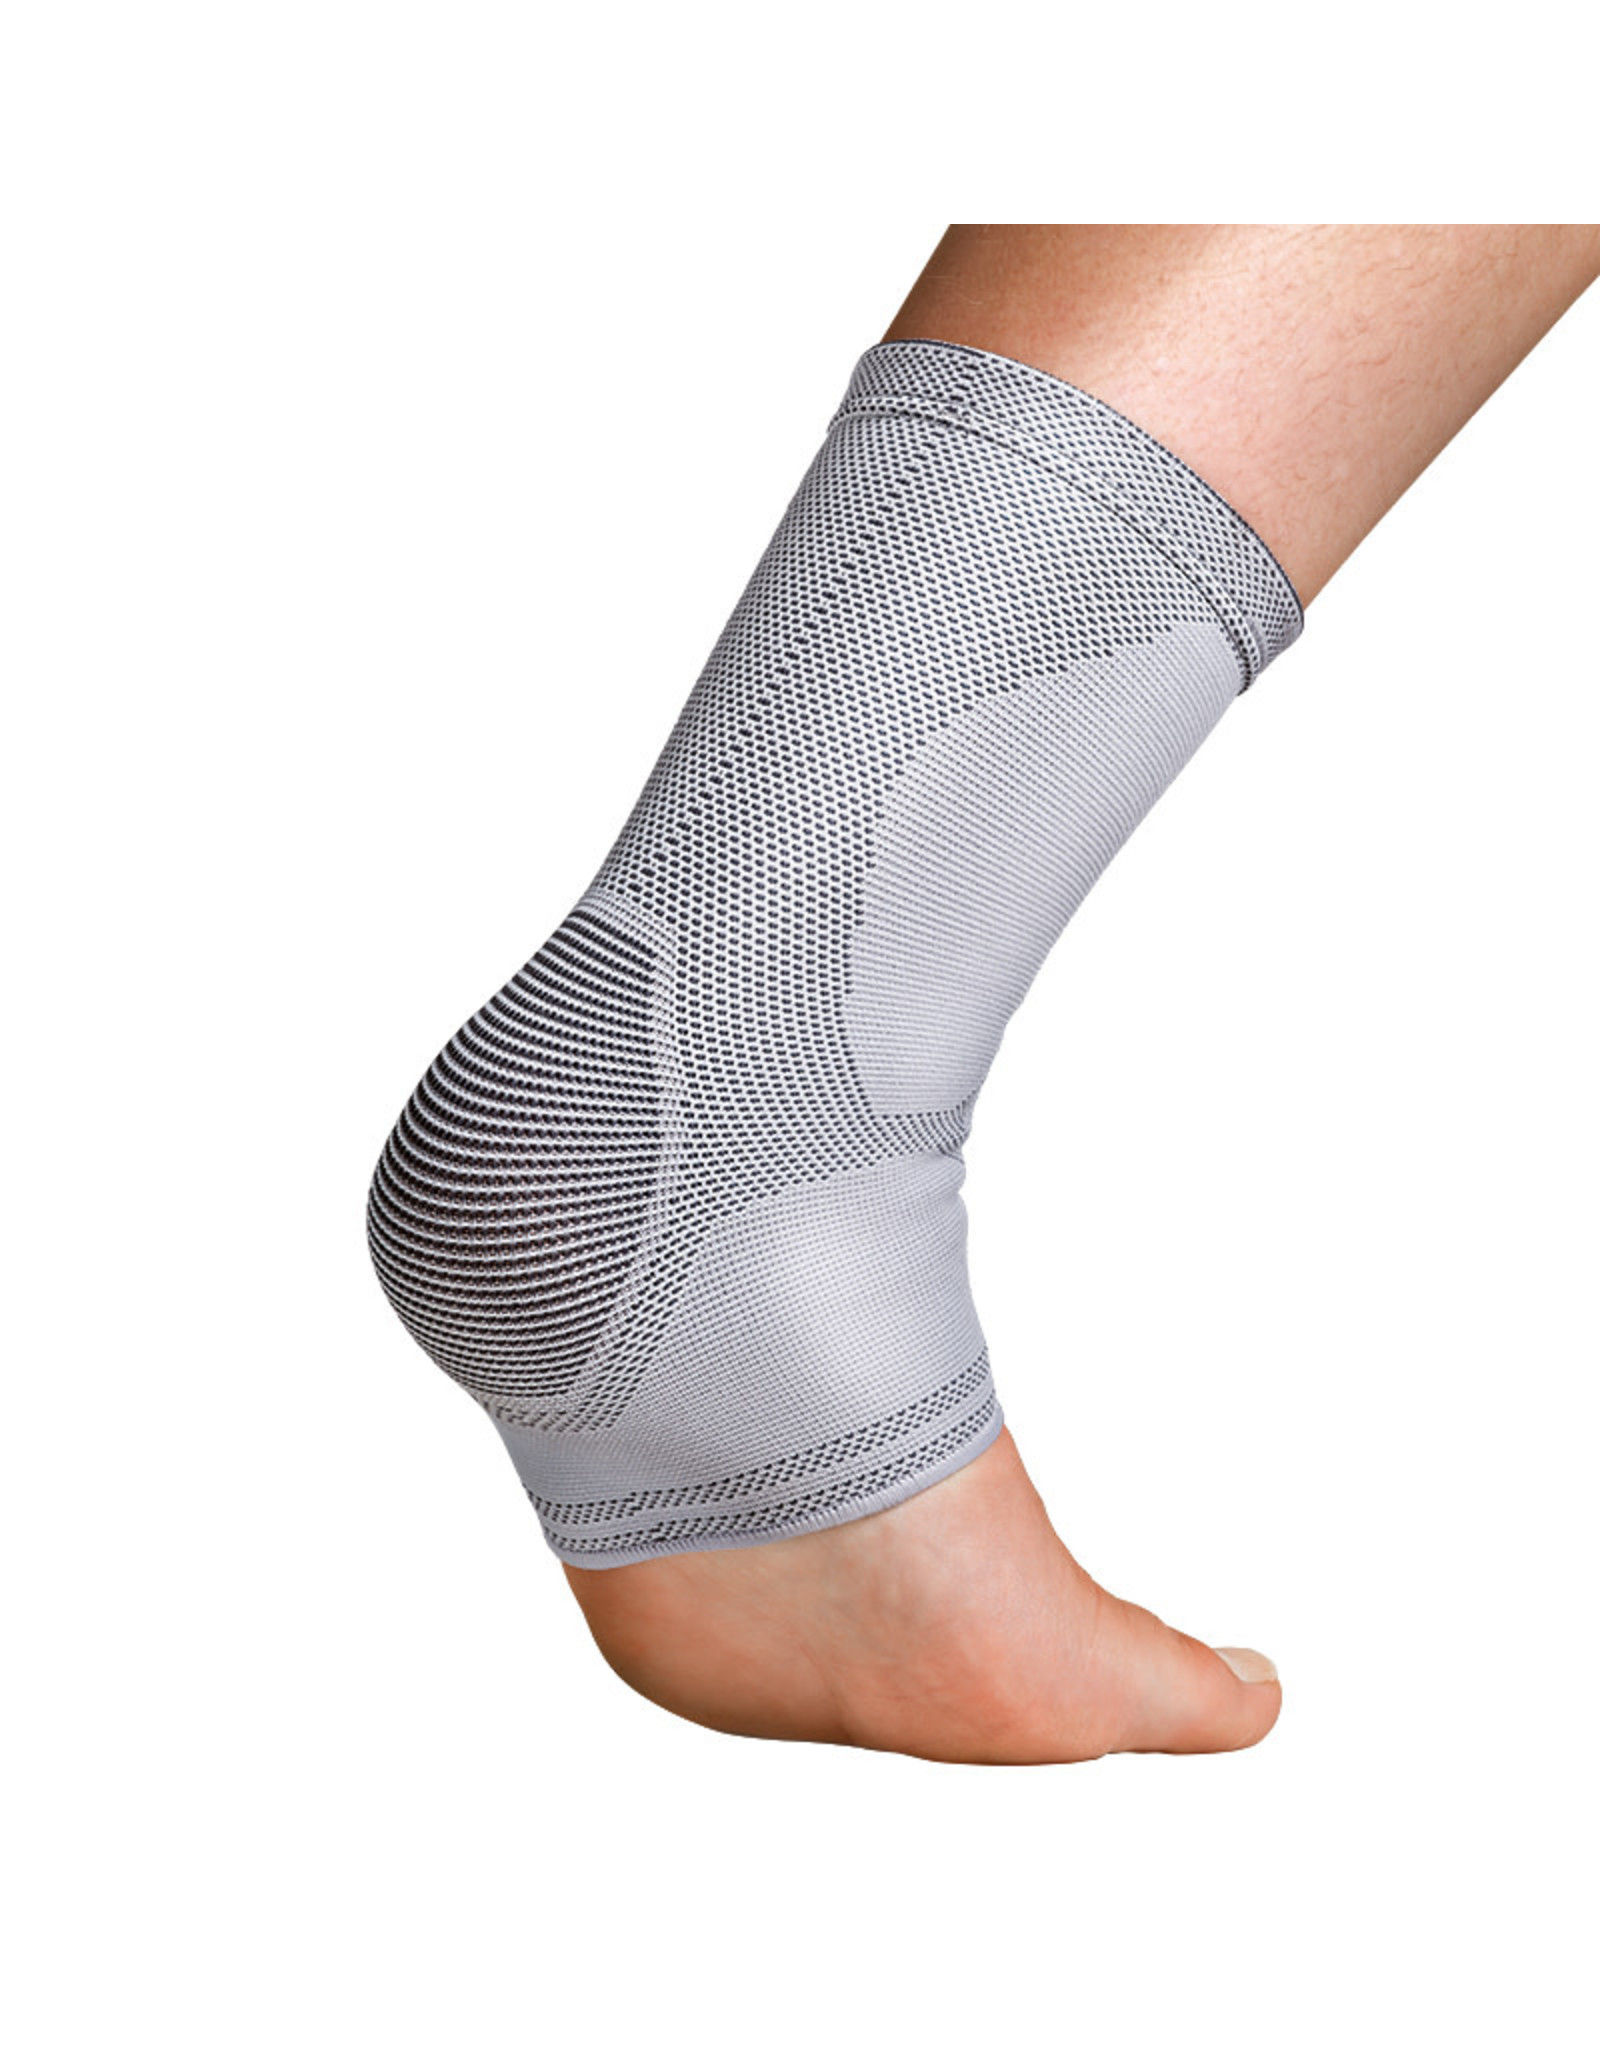 Thermoskin Dynamic Compression Sleeve - Ankle